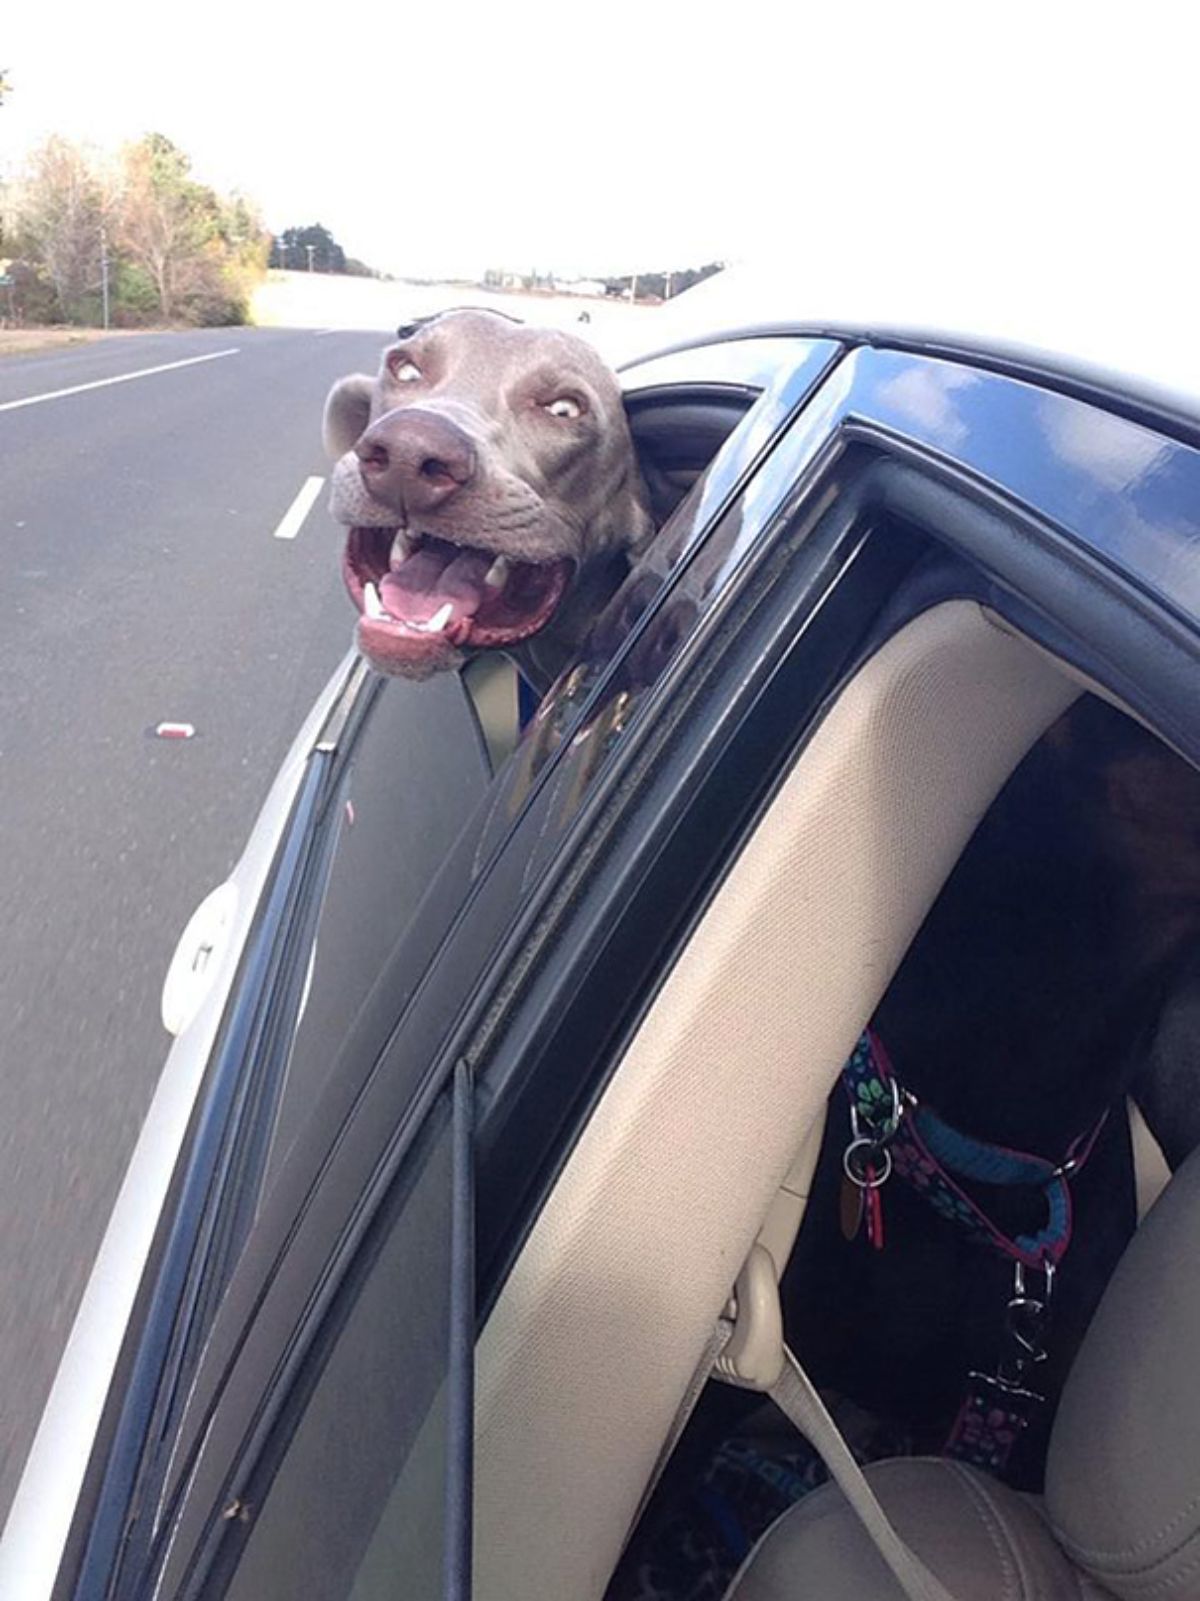 grey dog sticking head out of a car window and looking surprised